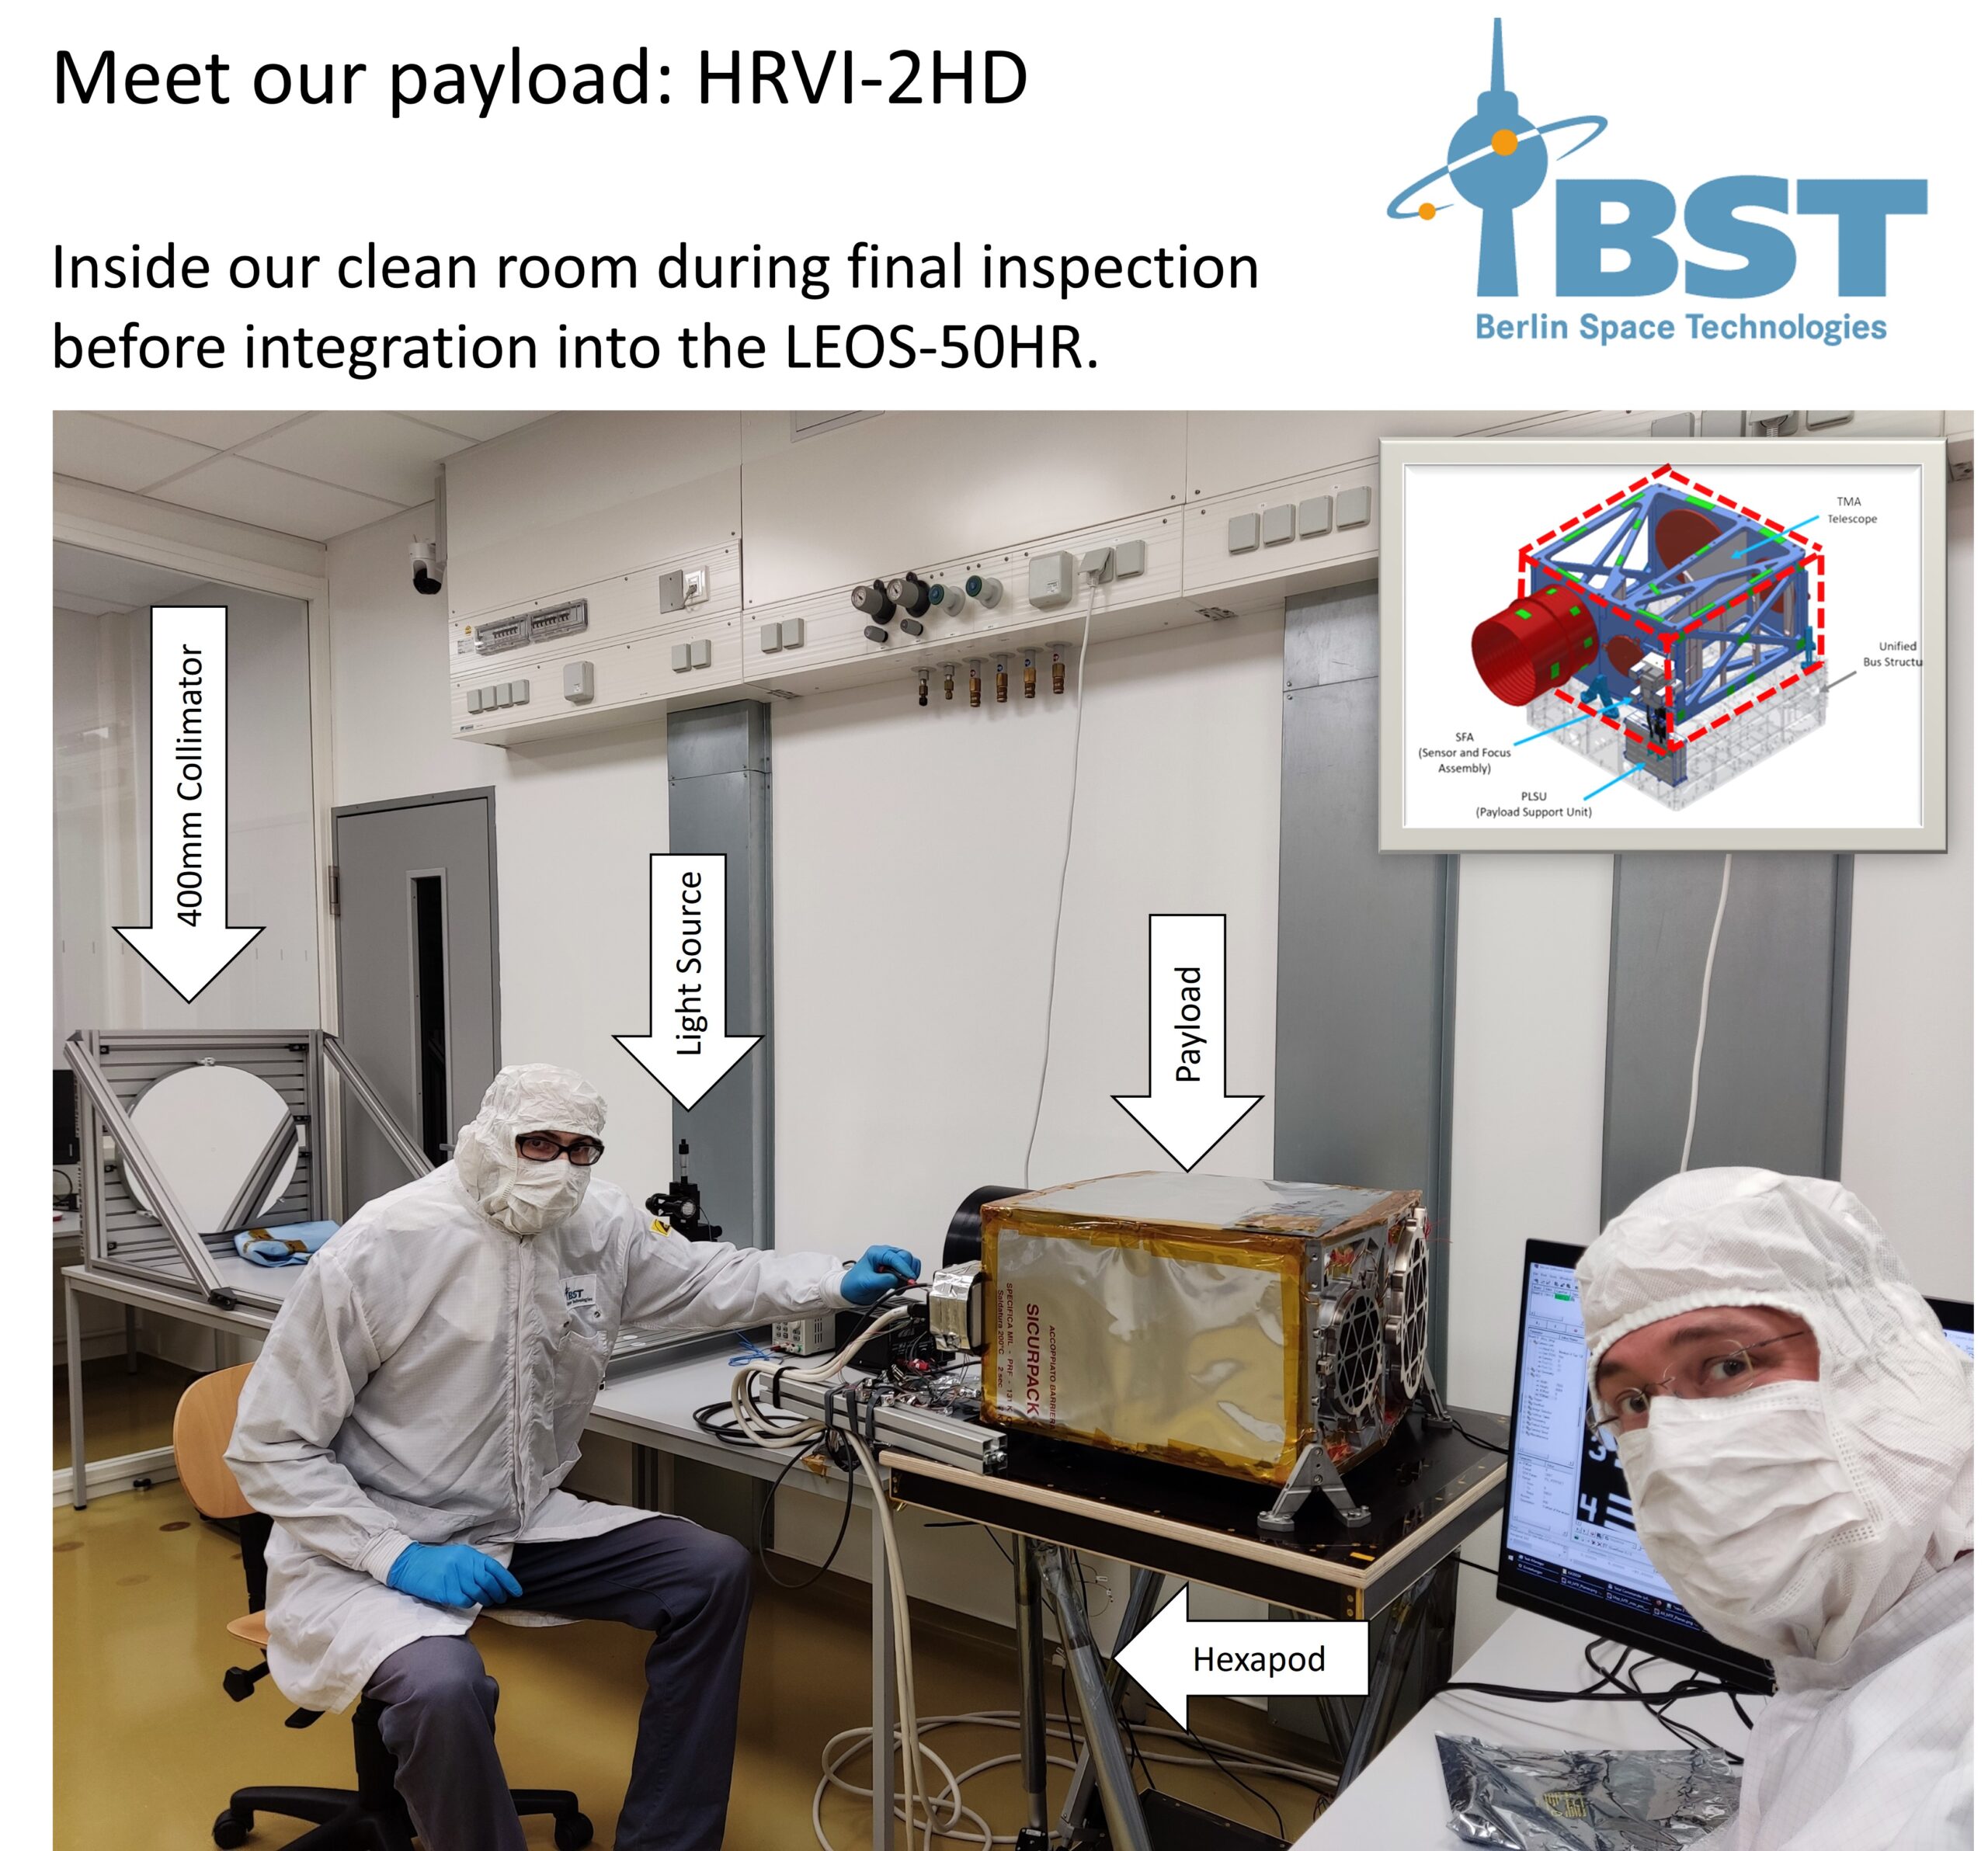 Meet our Payload: HRVI-2HD